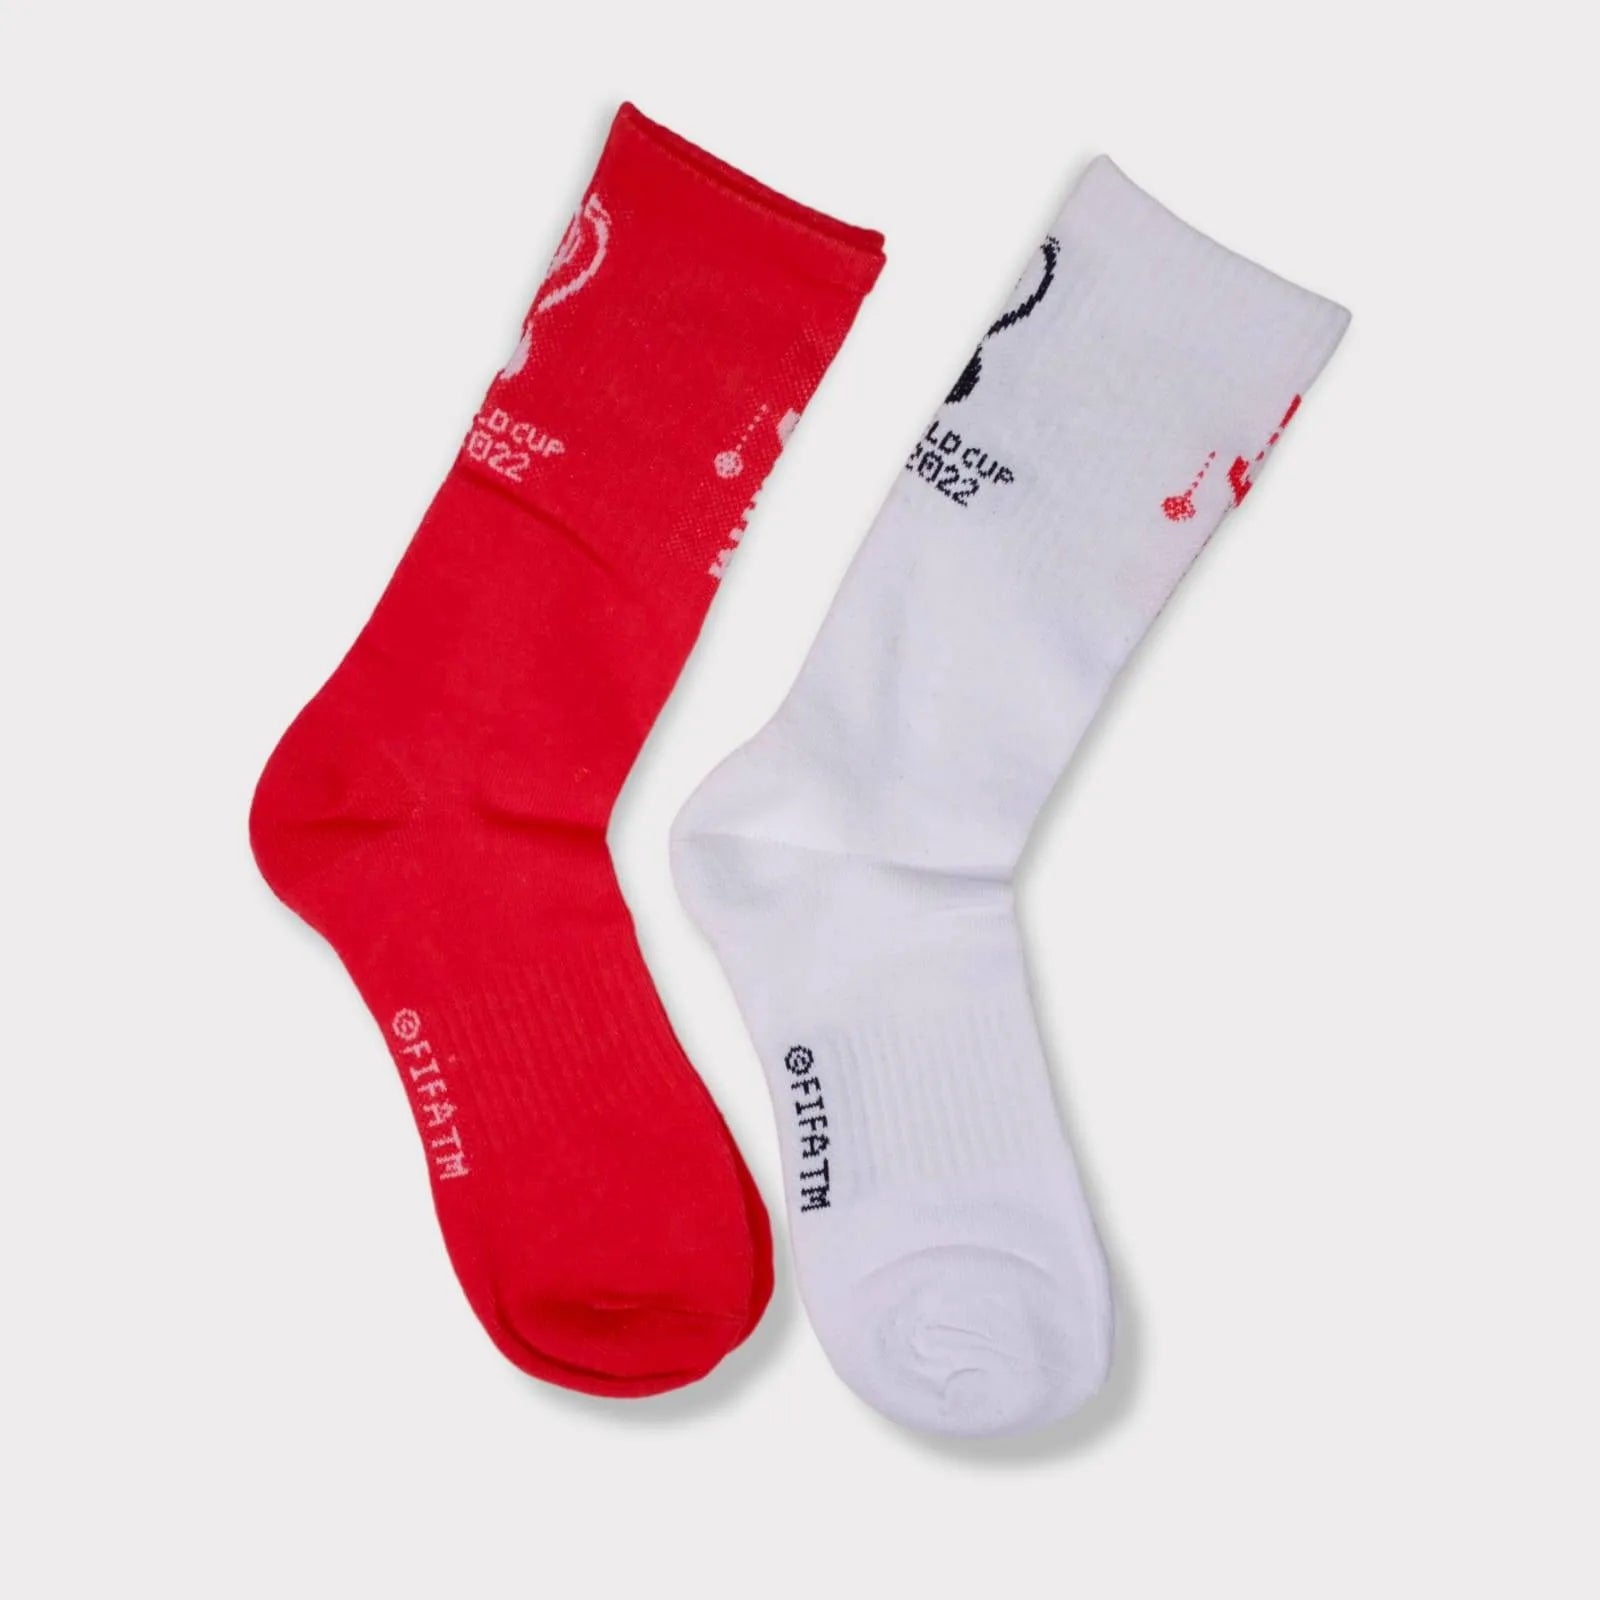 FIFA England Boys Socks Show your England pride with this 2-pack (mention sizes if relevant). white & red, FIFA official, comfortable, stylish.